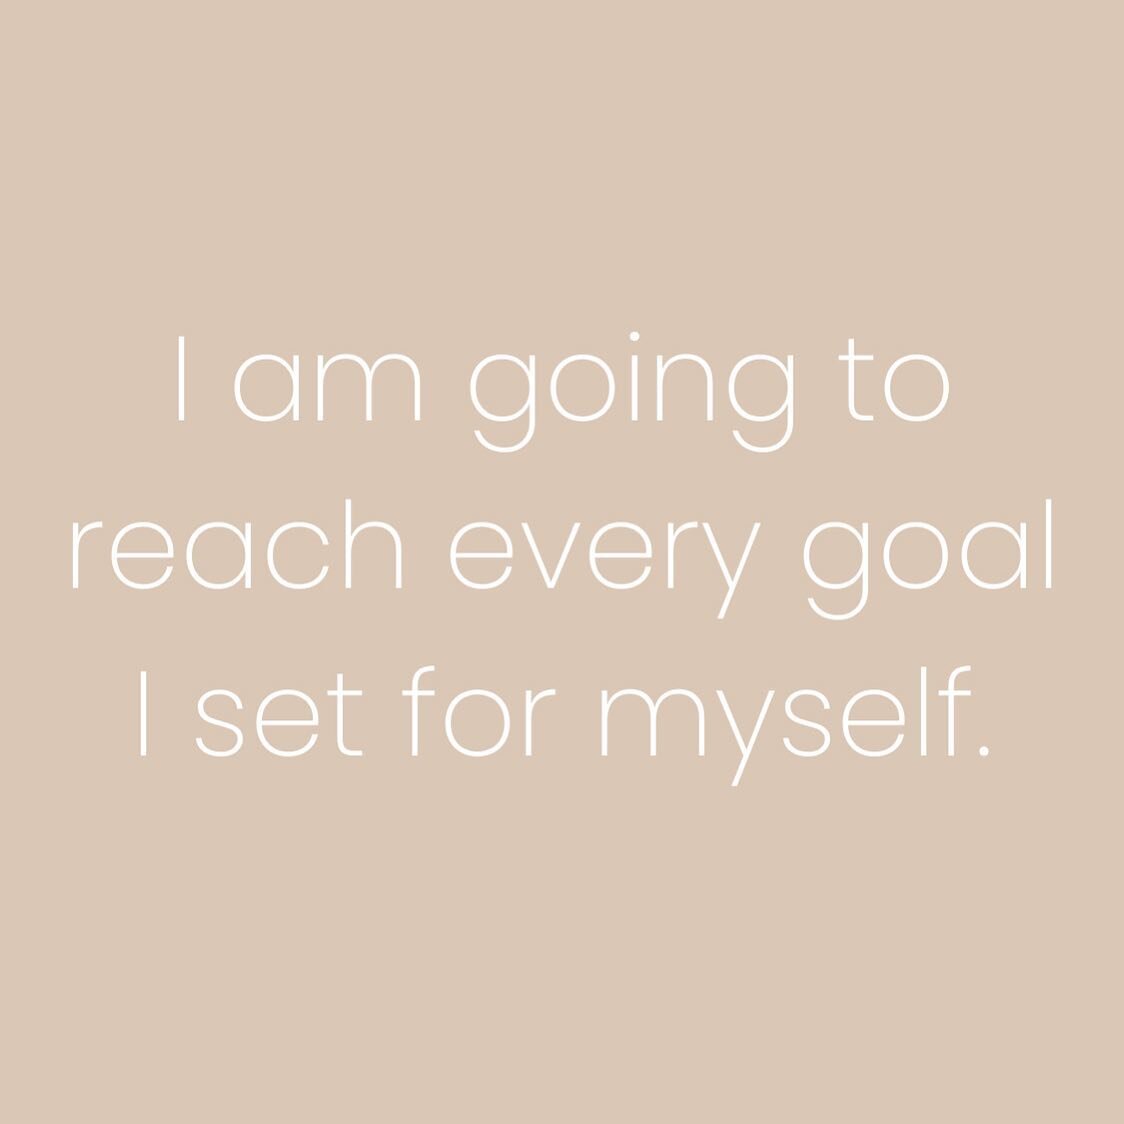 How are your 2021 goals coming along!? I have been sticking to mine- you got this ✨
&bull;
&bull;
#theparlourstylist
#theparlourhairandbeauty
#2021goals
#positiveaffirmations